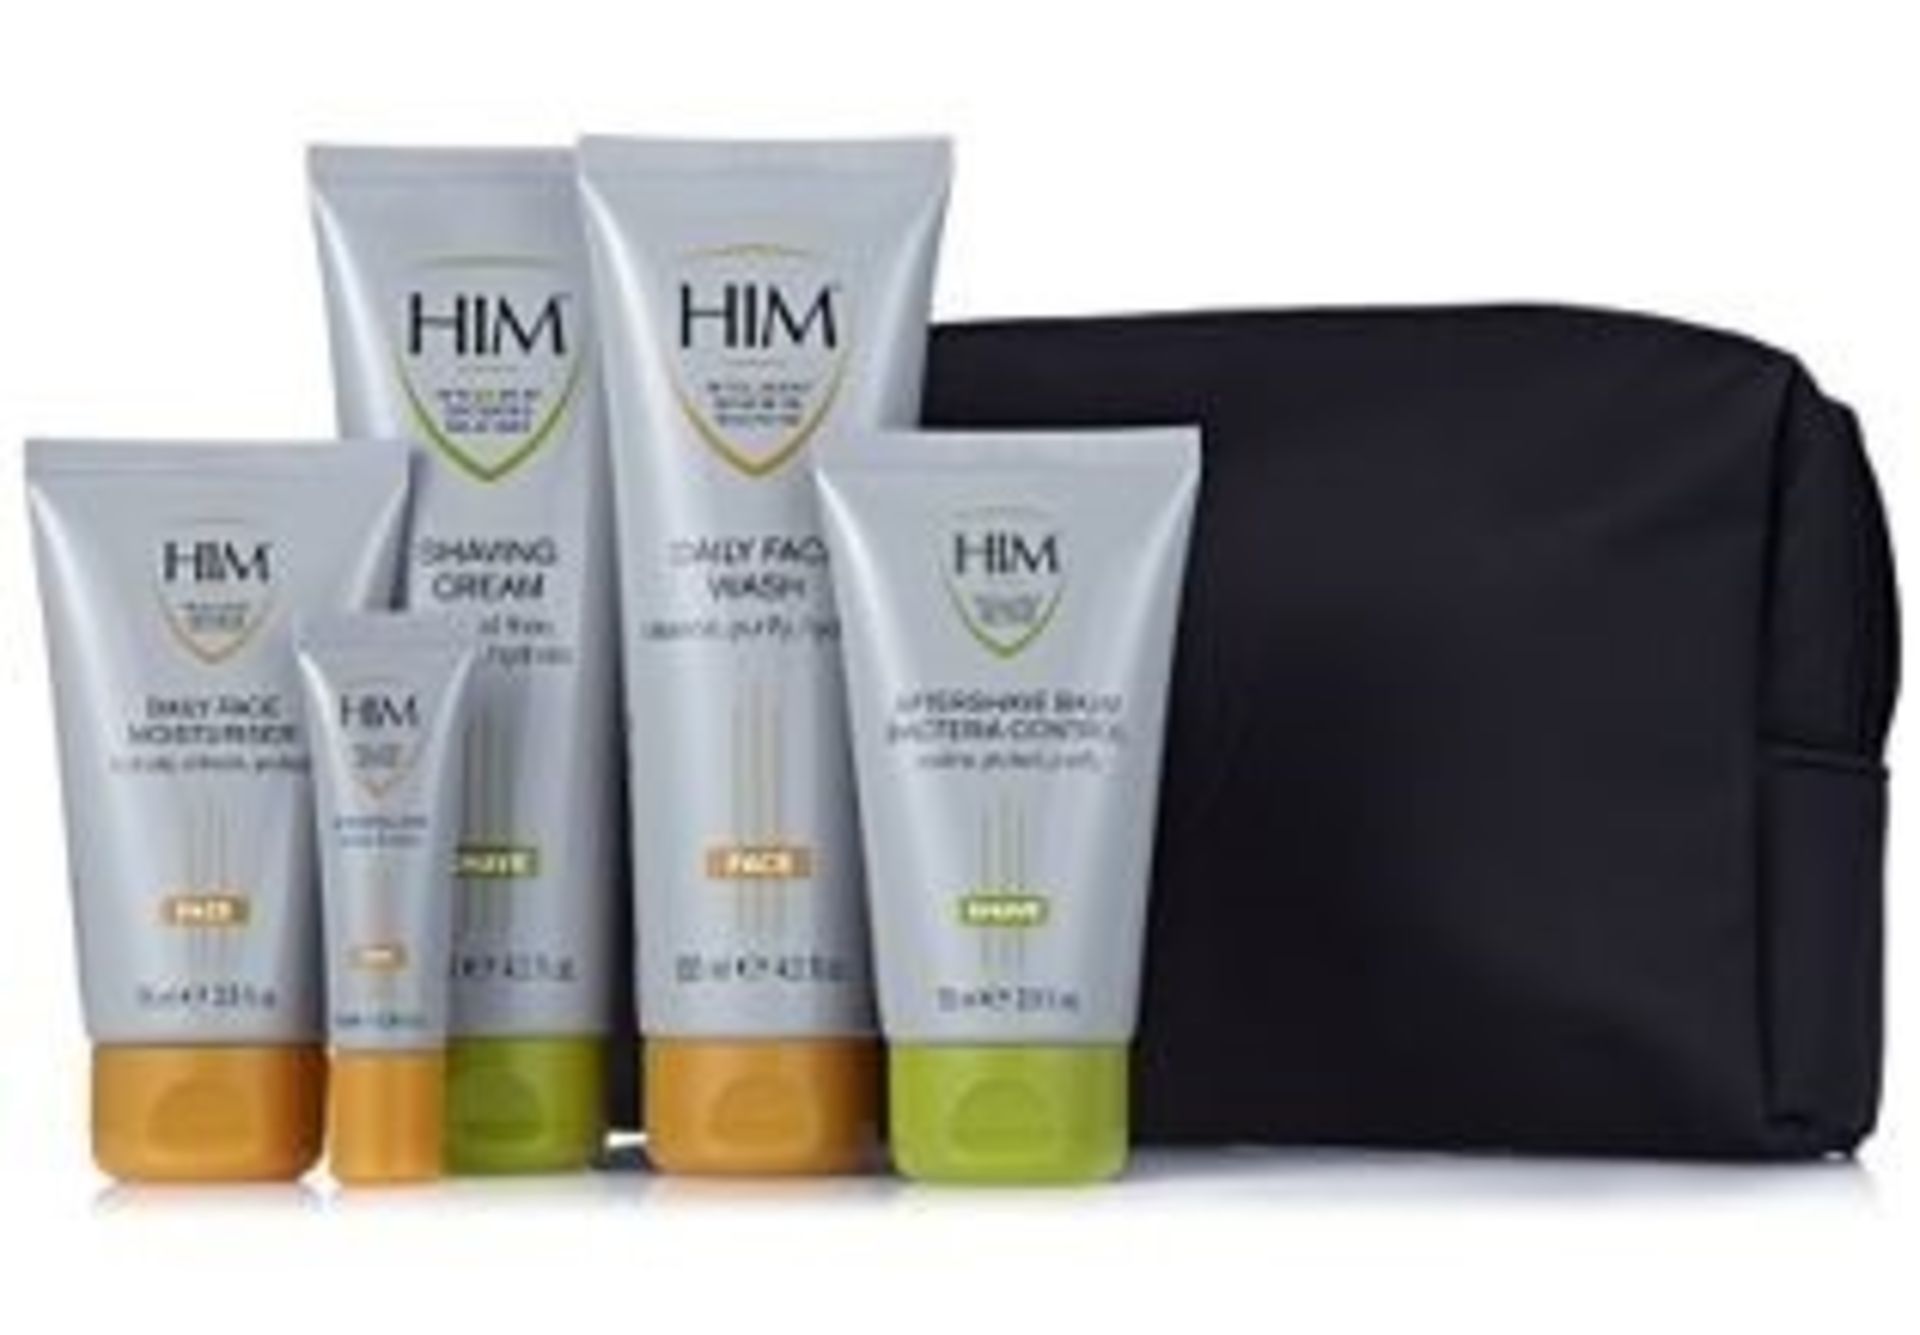 1 x HIM Intelligent Grooming Solutions 5 Piece Face & Shave Essentials Pack with Toiletry Bag - - Image 2 of 2